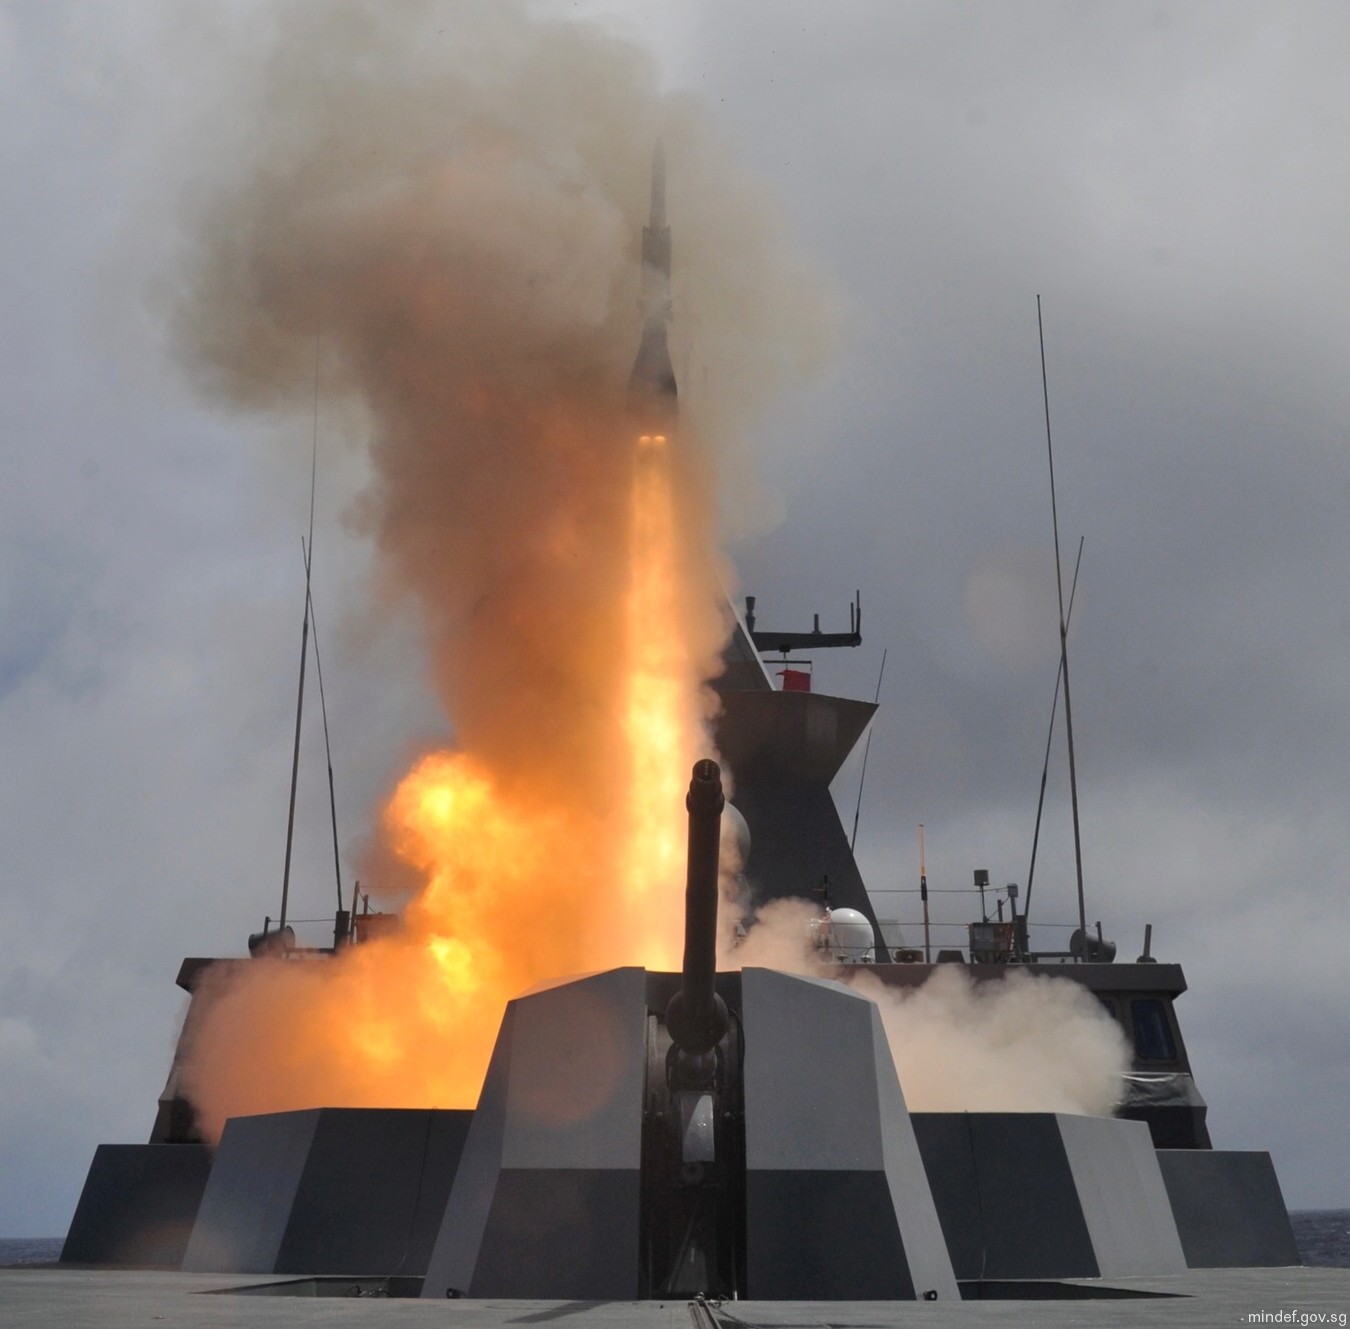 69 rss intrepid formidable class multi-mission missile frigate ffg republic singapore navy mbda aster-30 sam 11